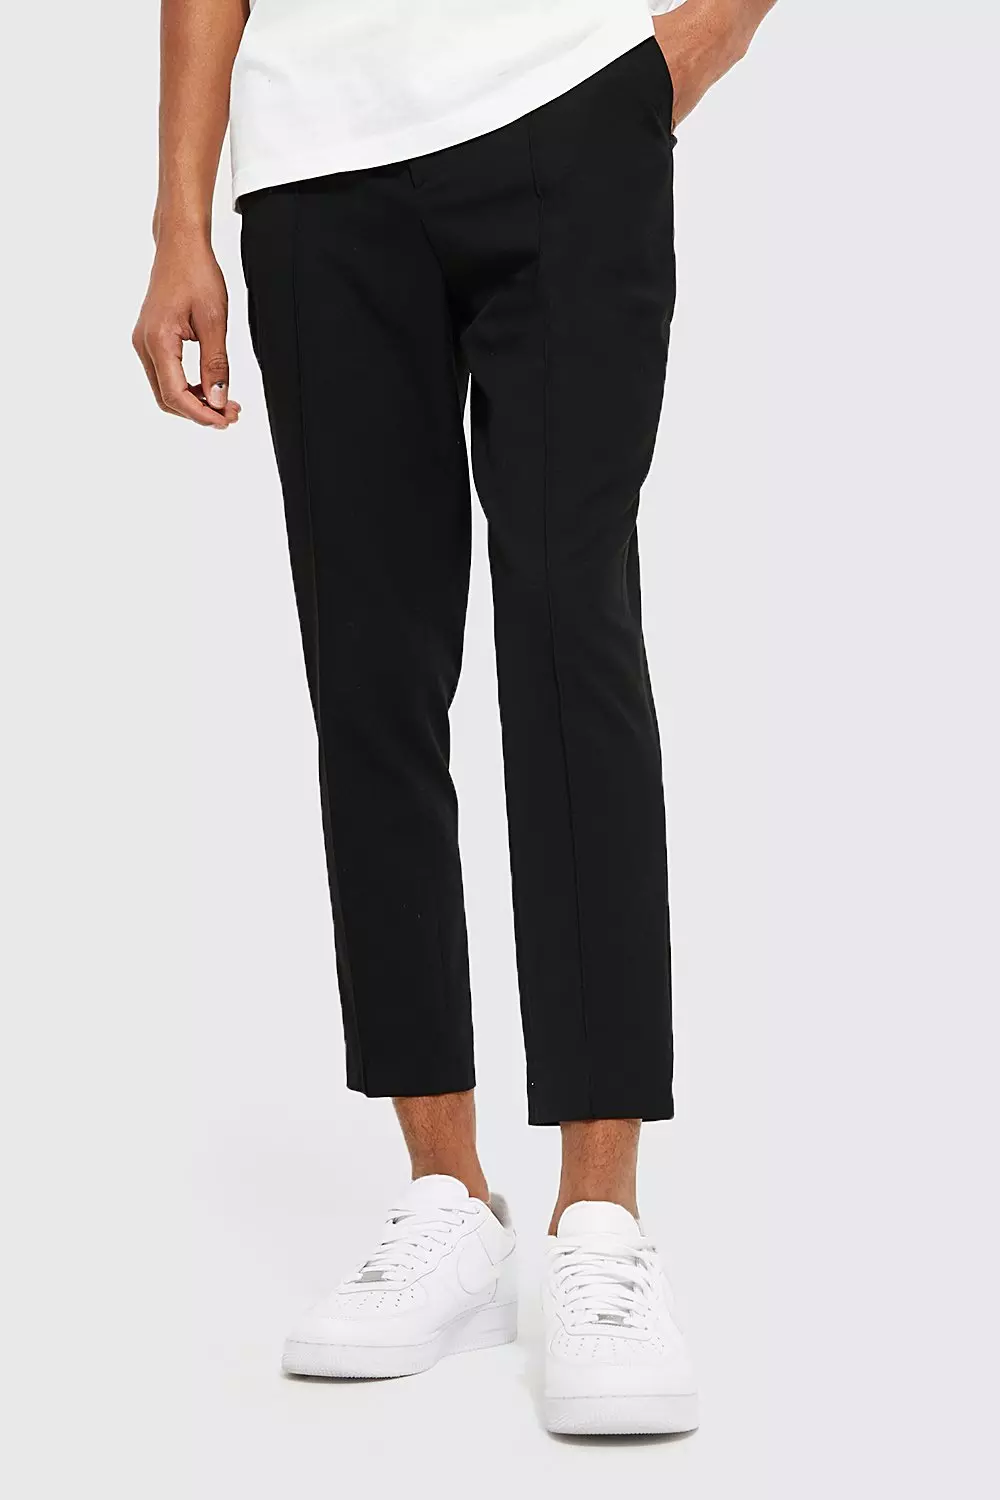 Skinny Plain Tapered Smart Pants With Pintuck Black